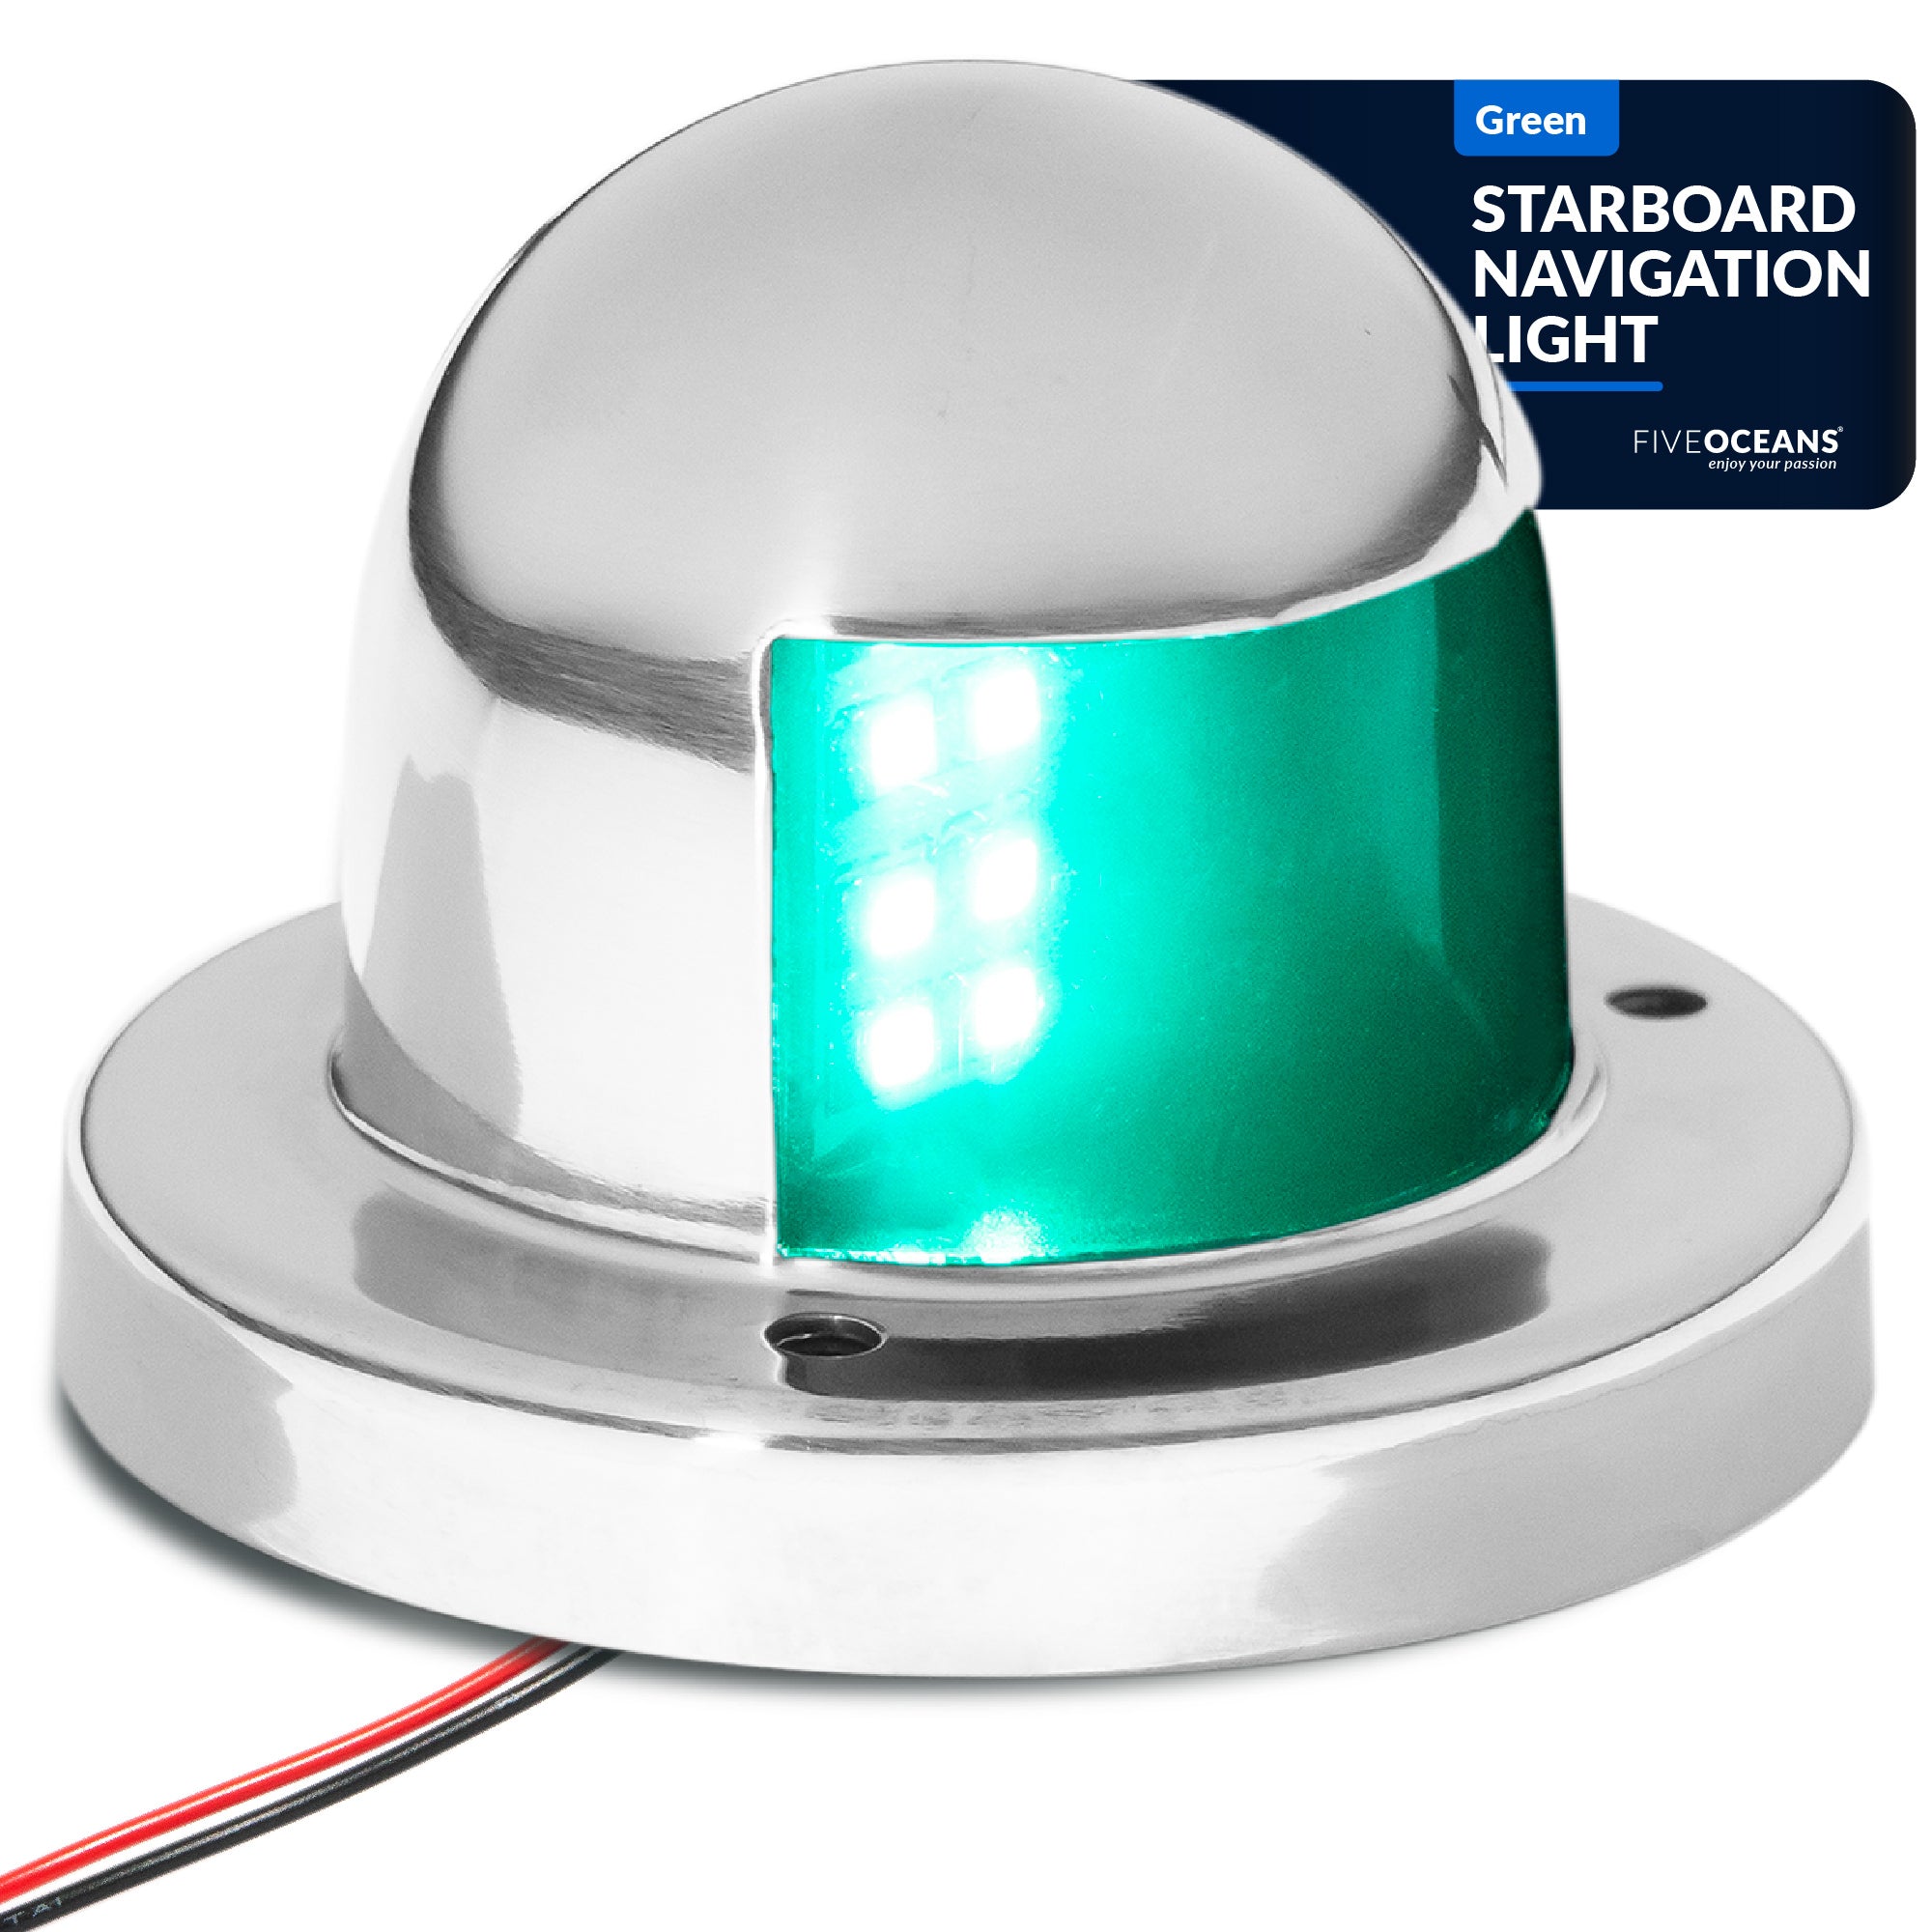 Five Oceans LED Boat Bow Navigation Light, Starboard Green, Deck Mount, AISI316 Stainless Steel Housing, Polycarbonate Lens, 12 Volts DC, FO-4431